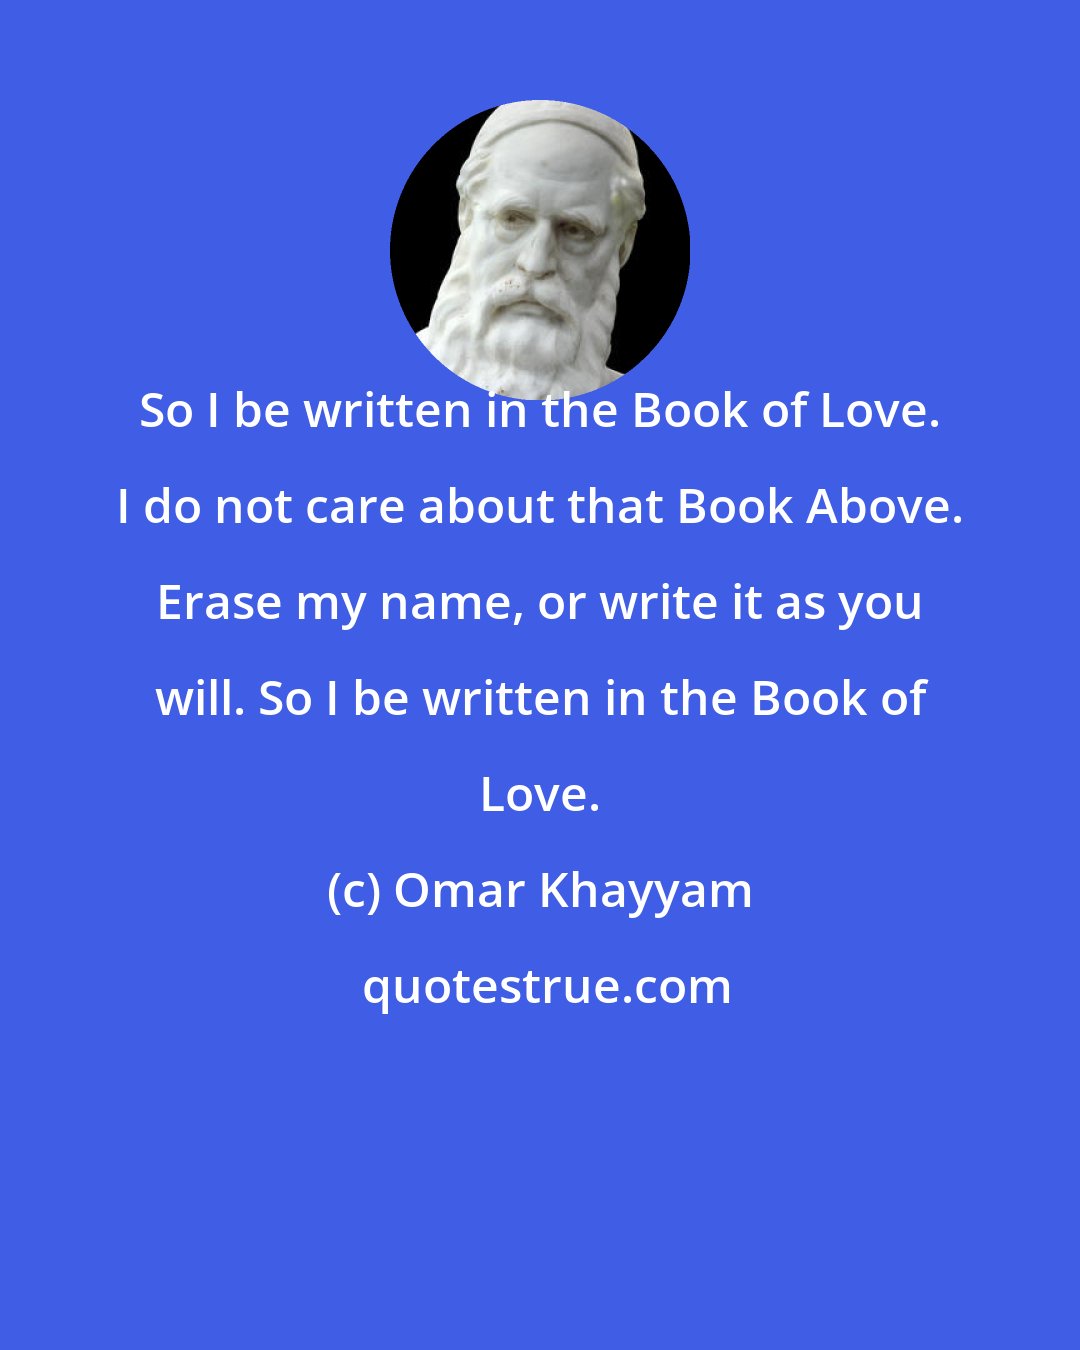 Omar Khayyam: So I be written in the Book of Love. I do not care about that Book Above. Erase my name, or write it as you will. So I be written in the Book of Love.